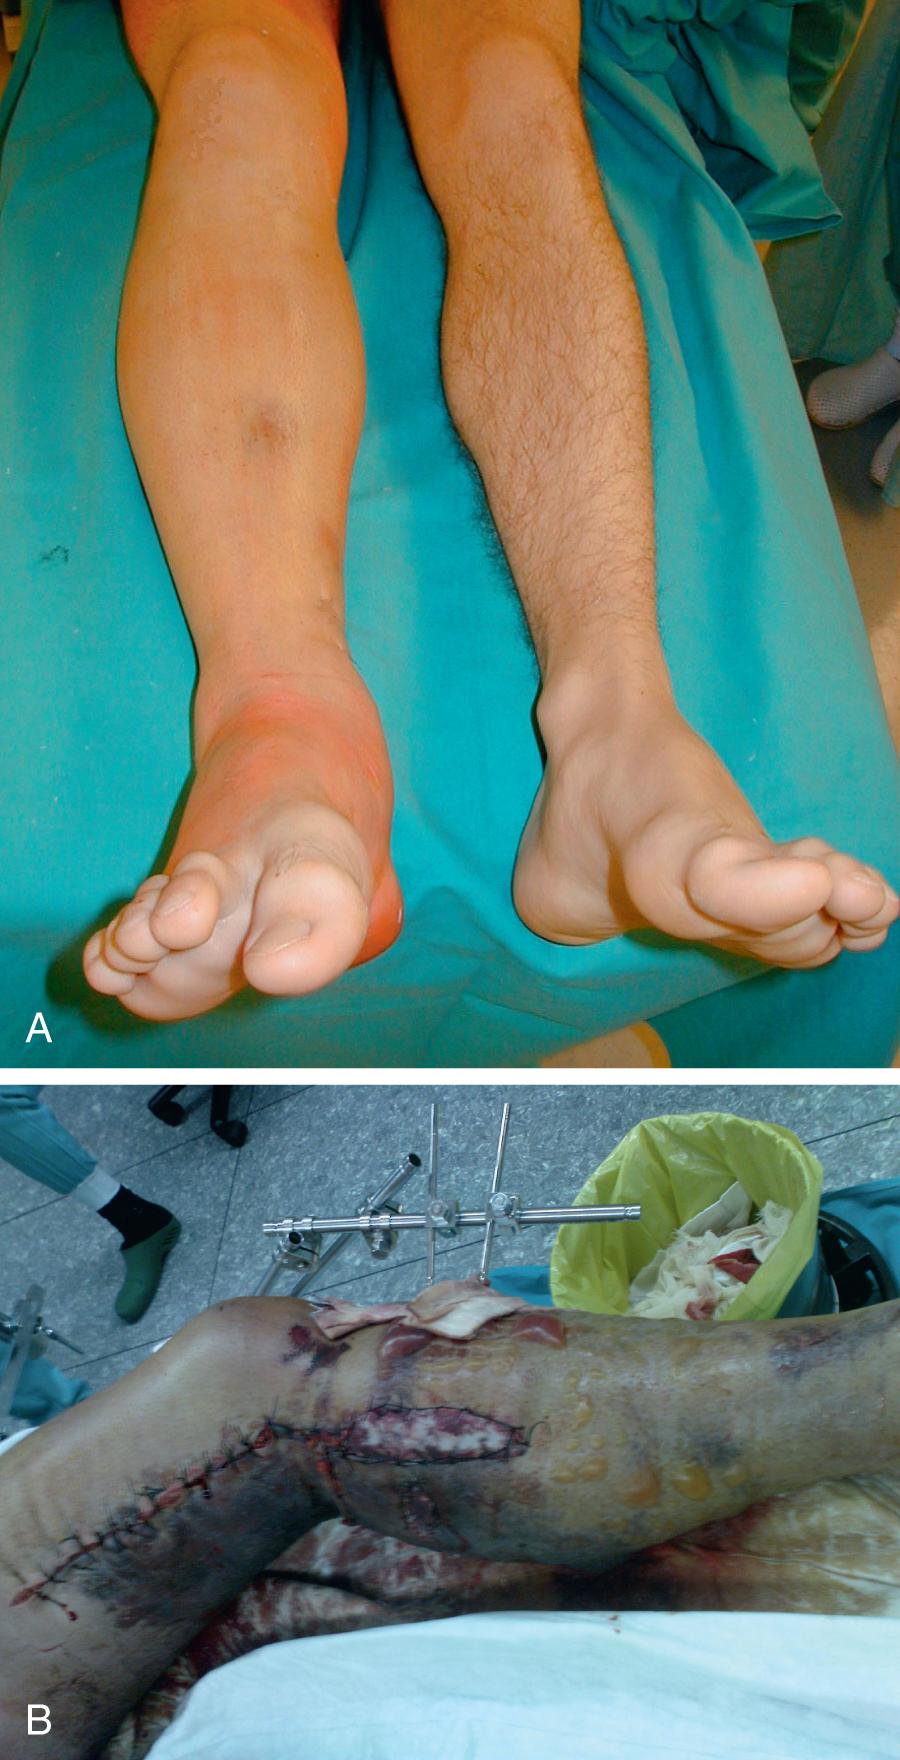 Fig. 151.1, A, A patient with right lower extremity compartment syndrome caused by isolated tibial fracture. On clinical presentation, pain, swelling, and inability of dorsal flexion of the toe were noted. B, Another patient with left lower extremity compartment syndrome after popliteal artery tear and revascularization in combination with proximal tibial fracture was treated with external fixation. A few hours later after initial treatment, there are obvious signs of developing compartment syndrome with swelling, skin discoloration, function loss, and fracture blisters.